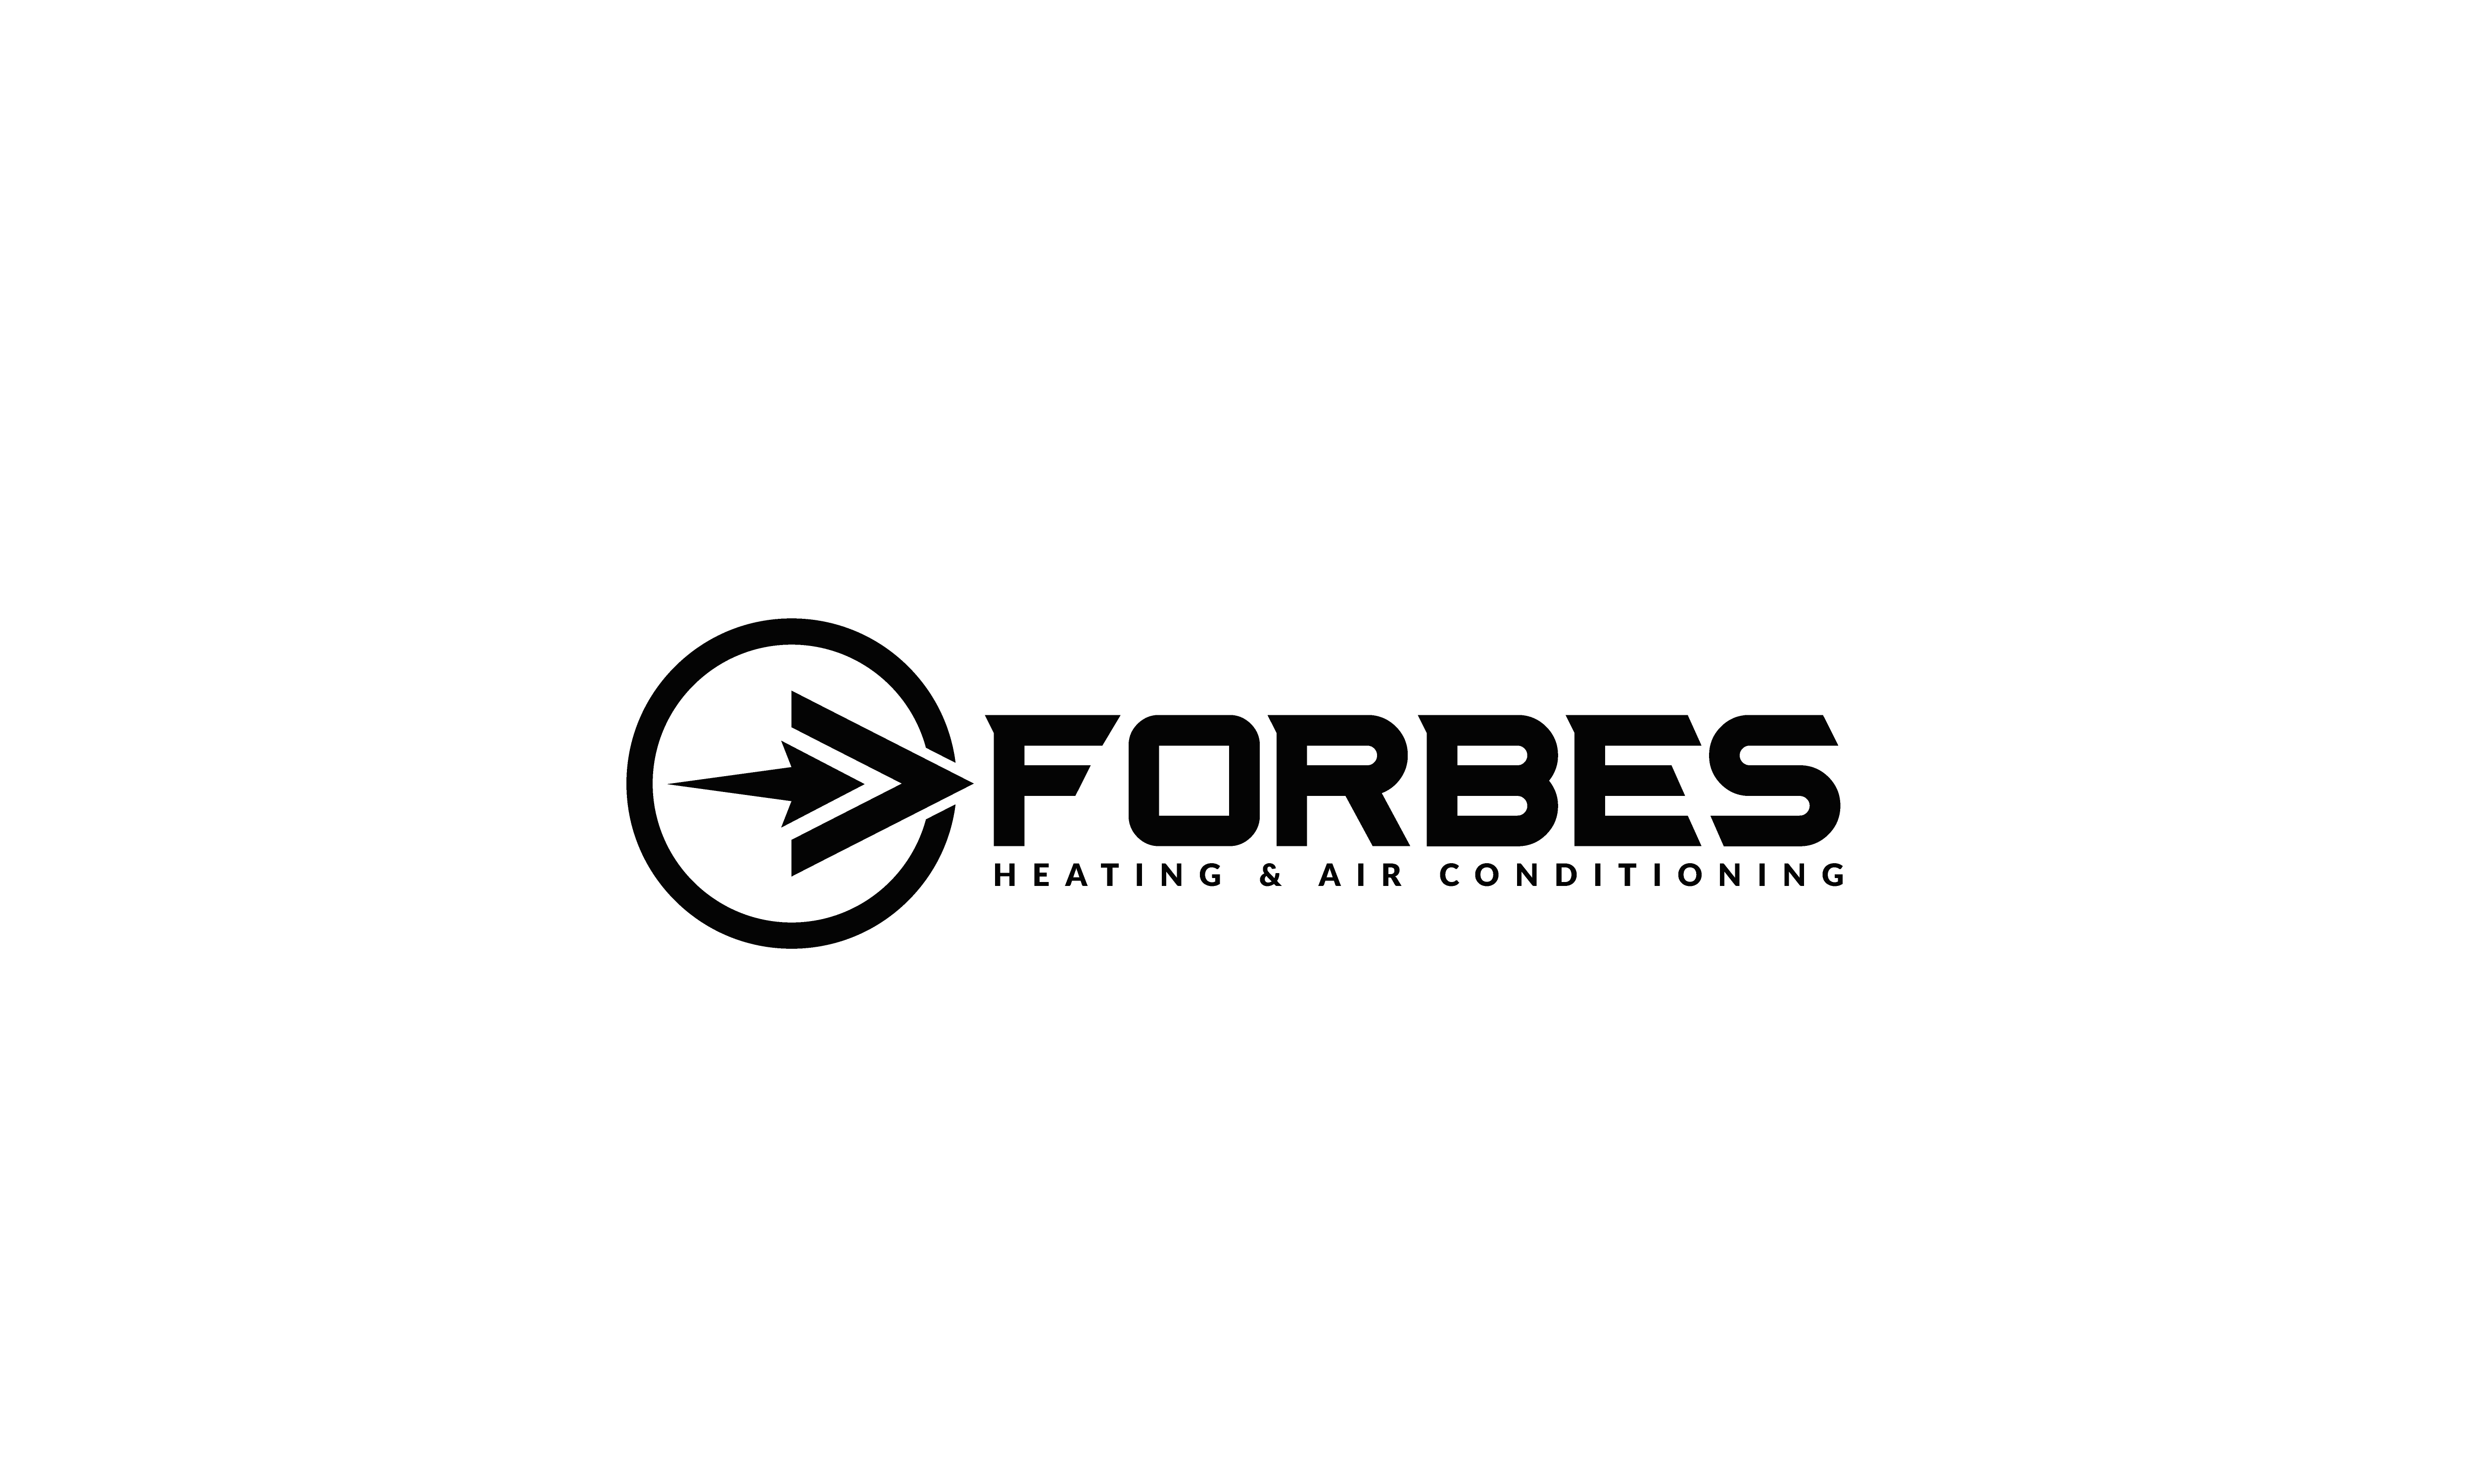 Forbes Heating and Air Conditioning Logo